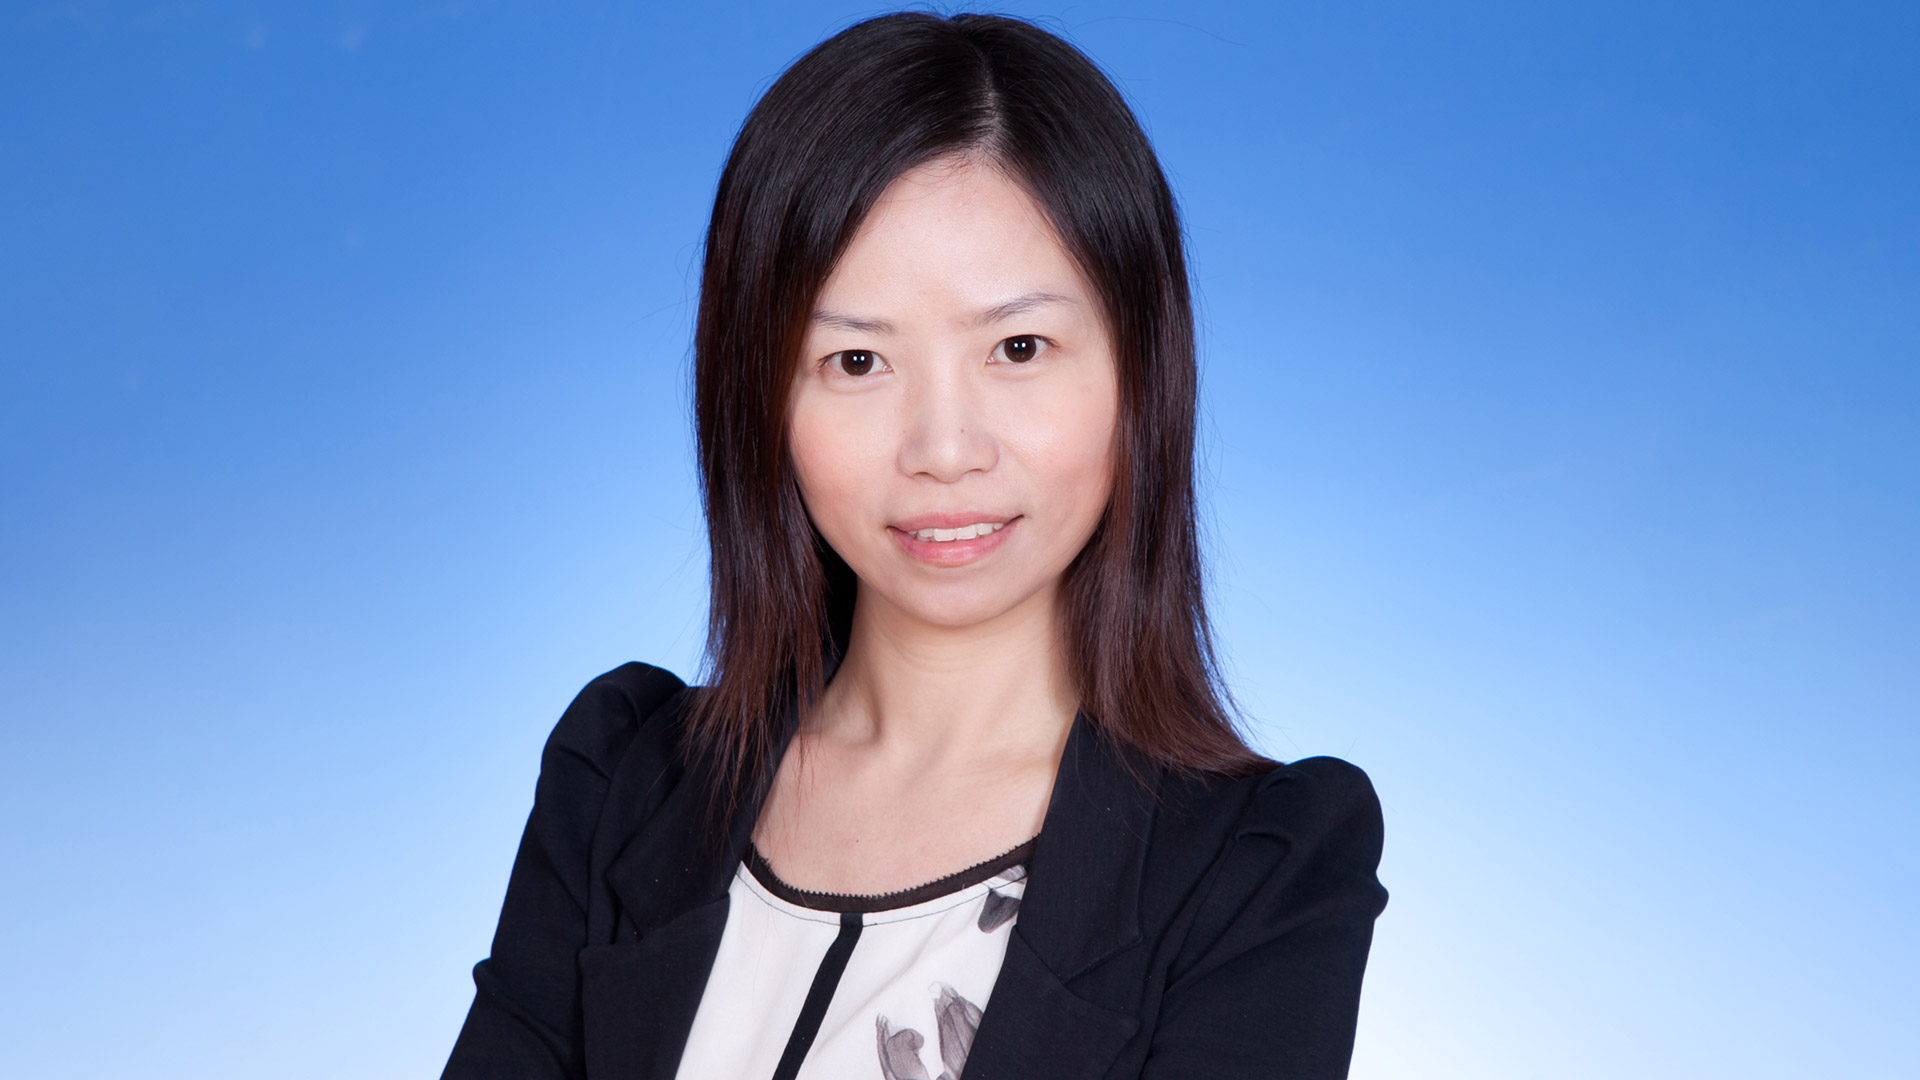 Lily Xiong, Head of Corporate Solutions, APAC, BlackRock